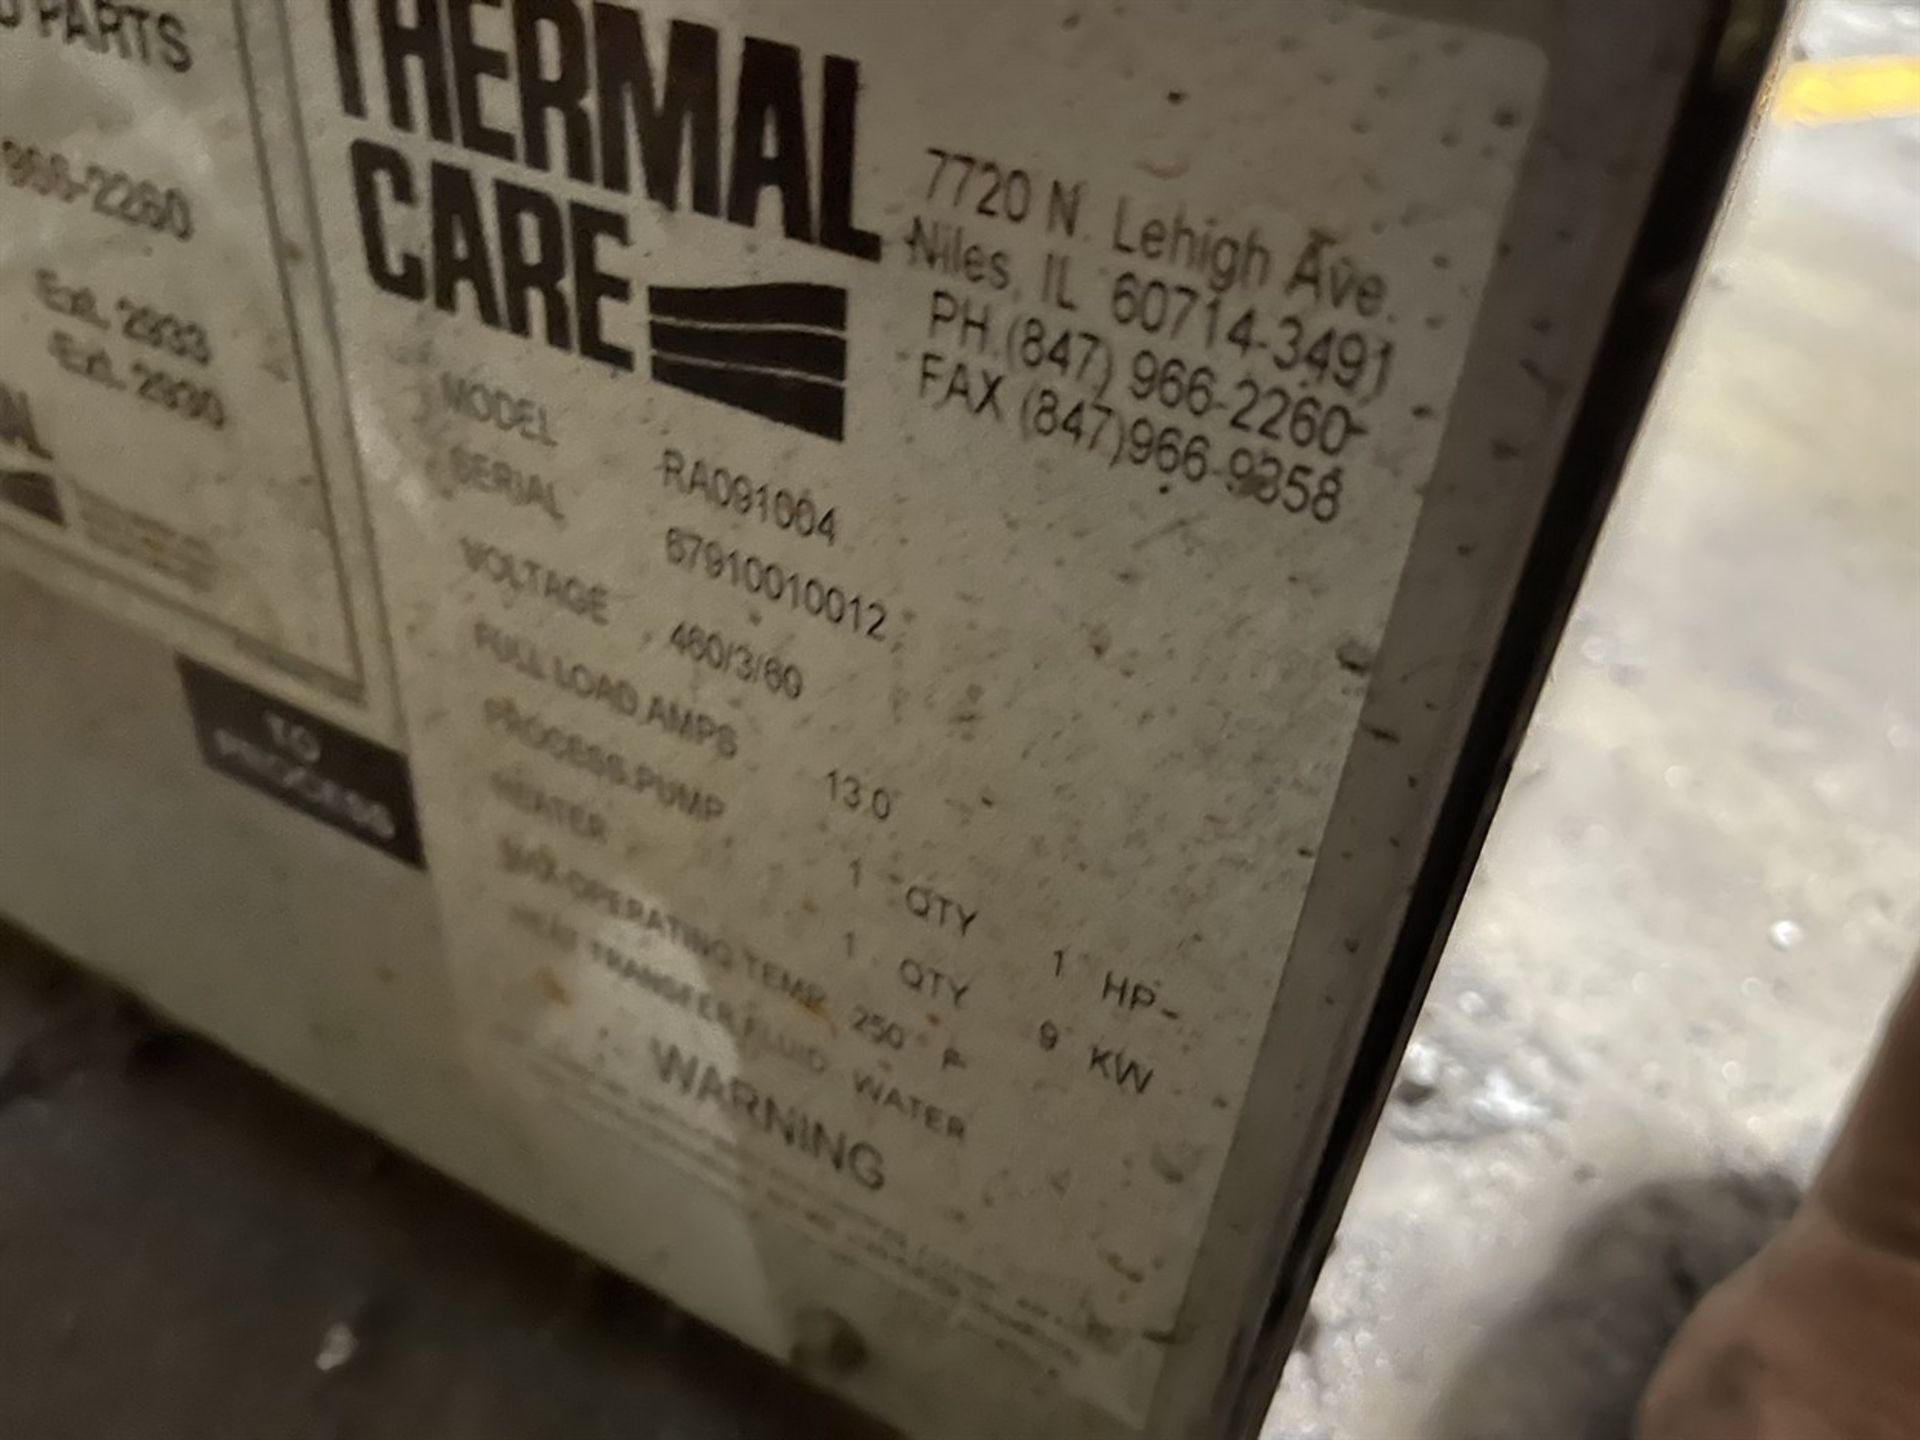 THERMAL CARE Aquatherm RA091004 Temperature Controller, s/n 67910010012 - Image 3 of 3